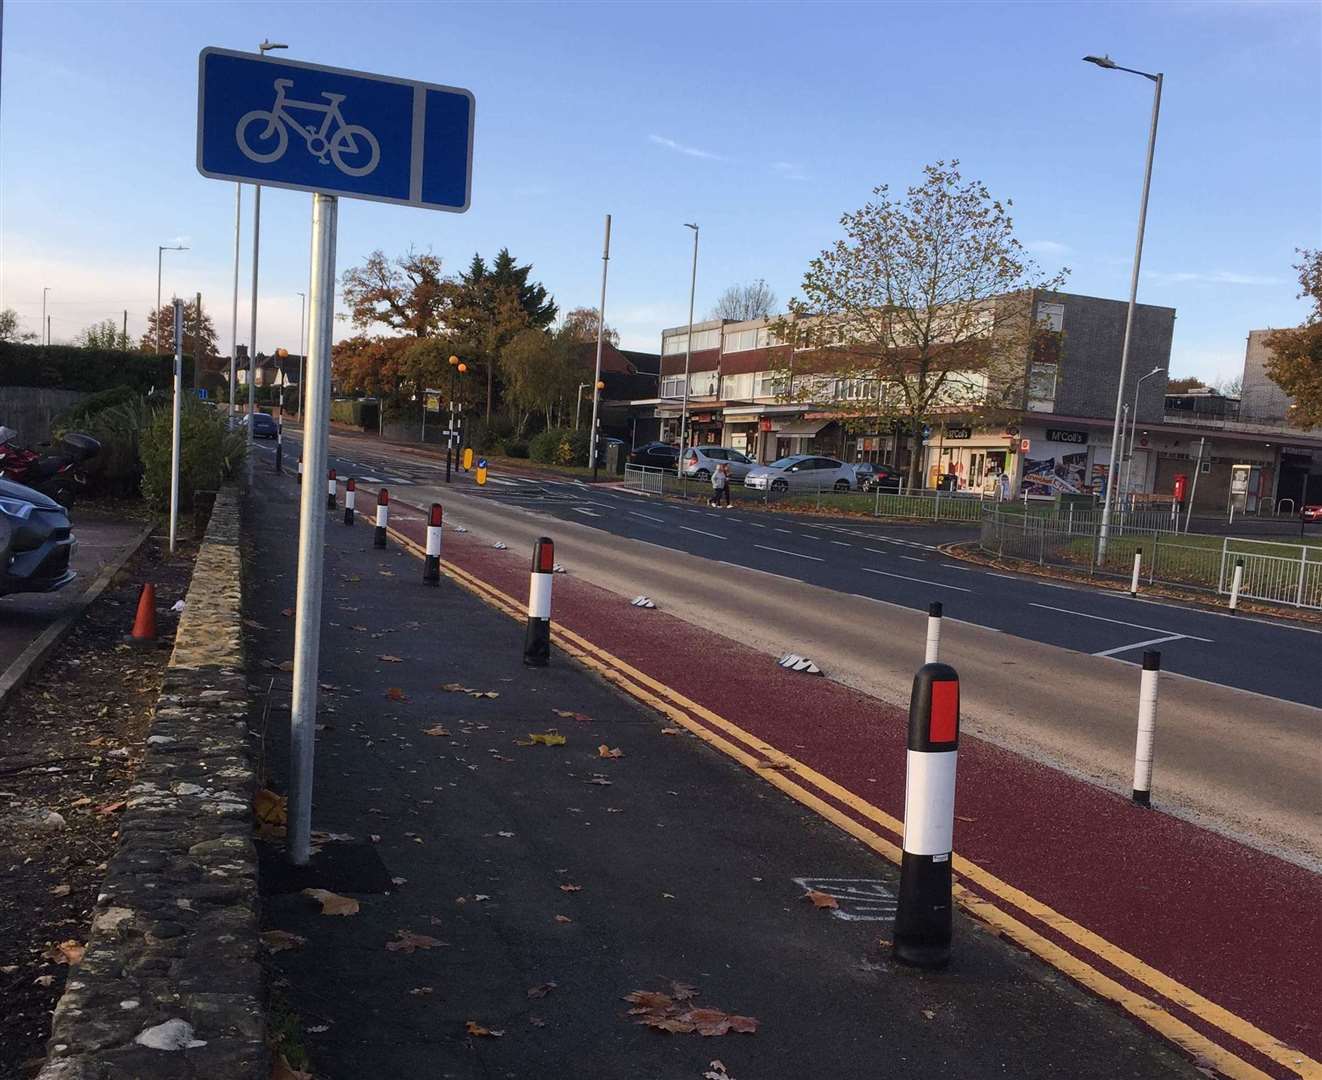 The updated cycle lane